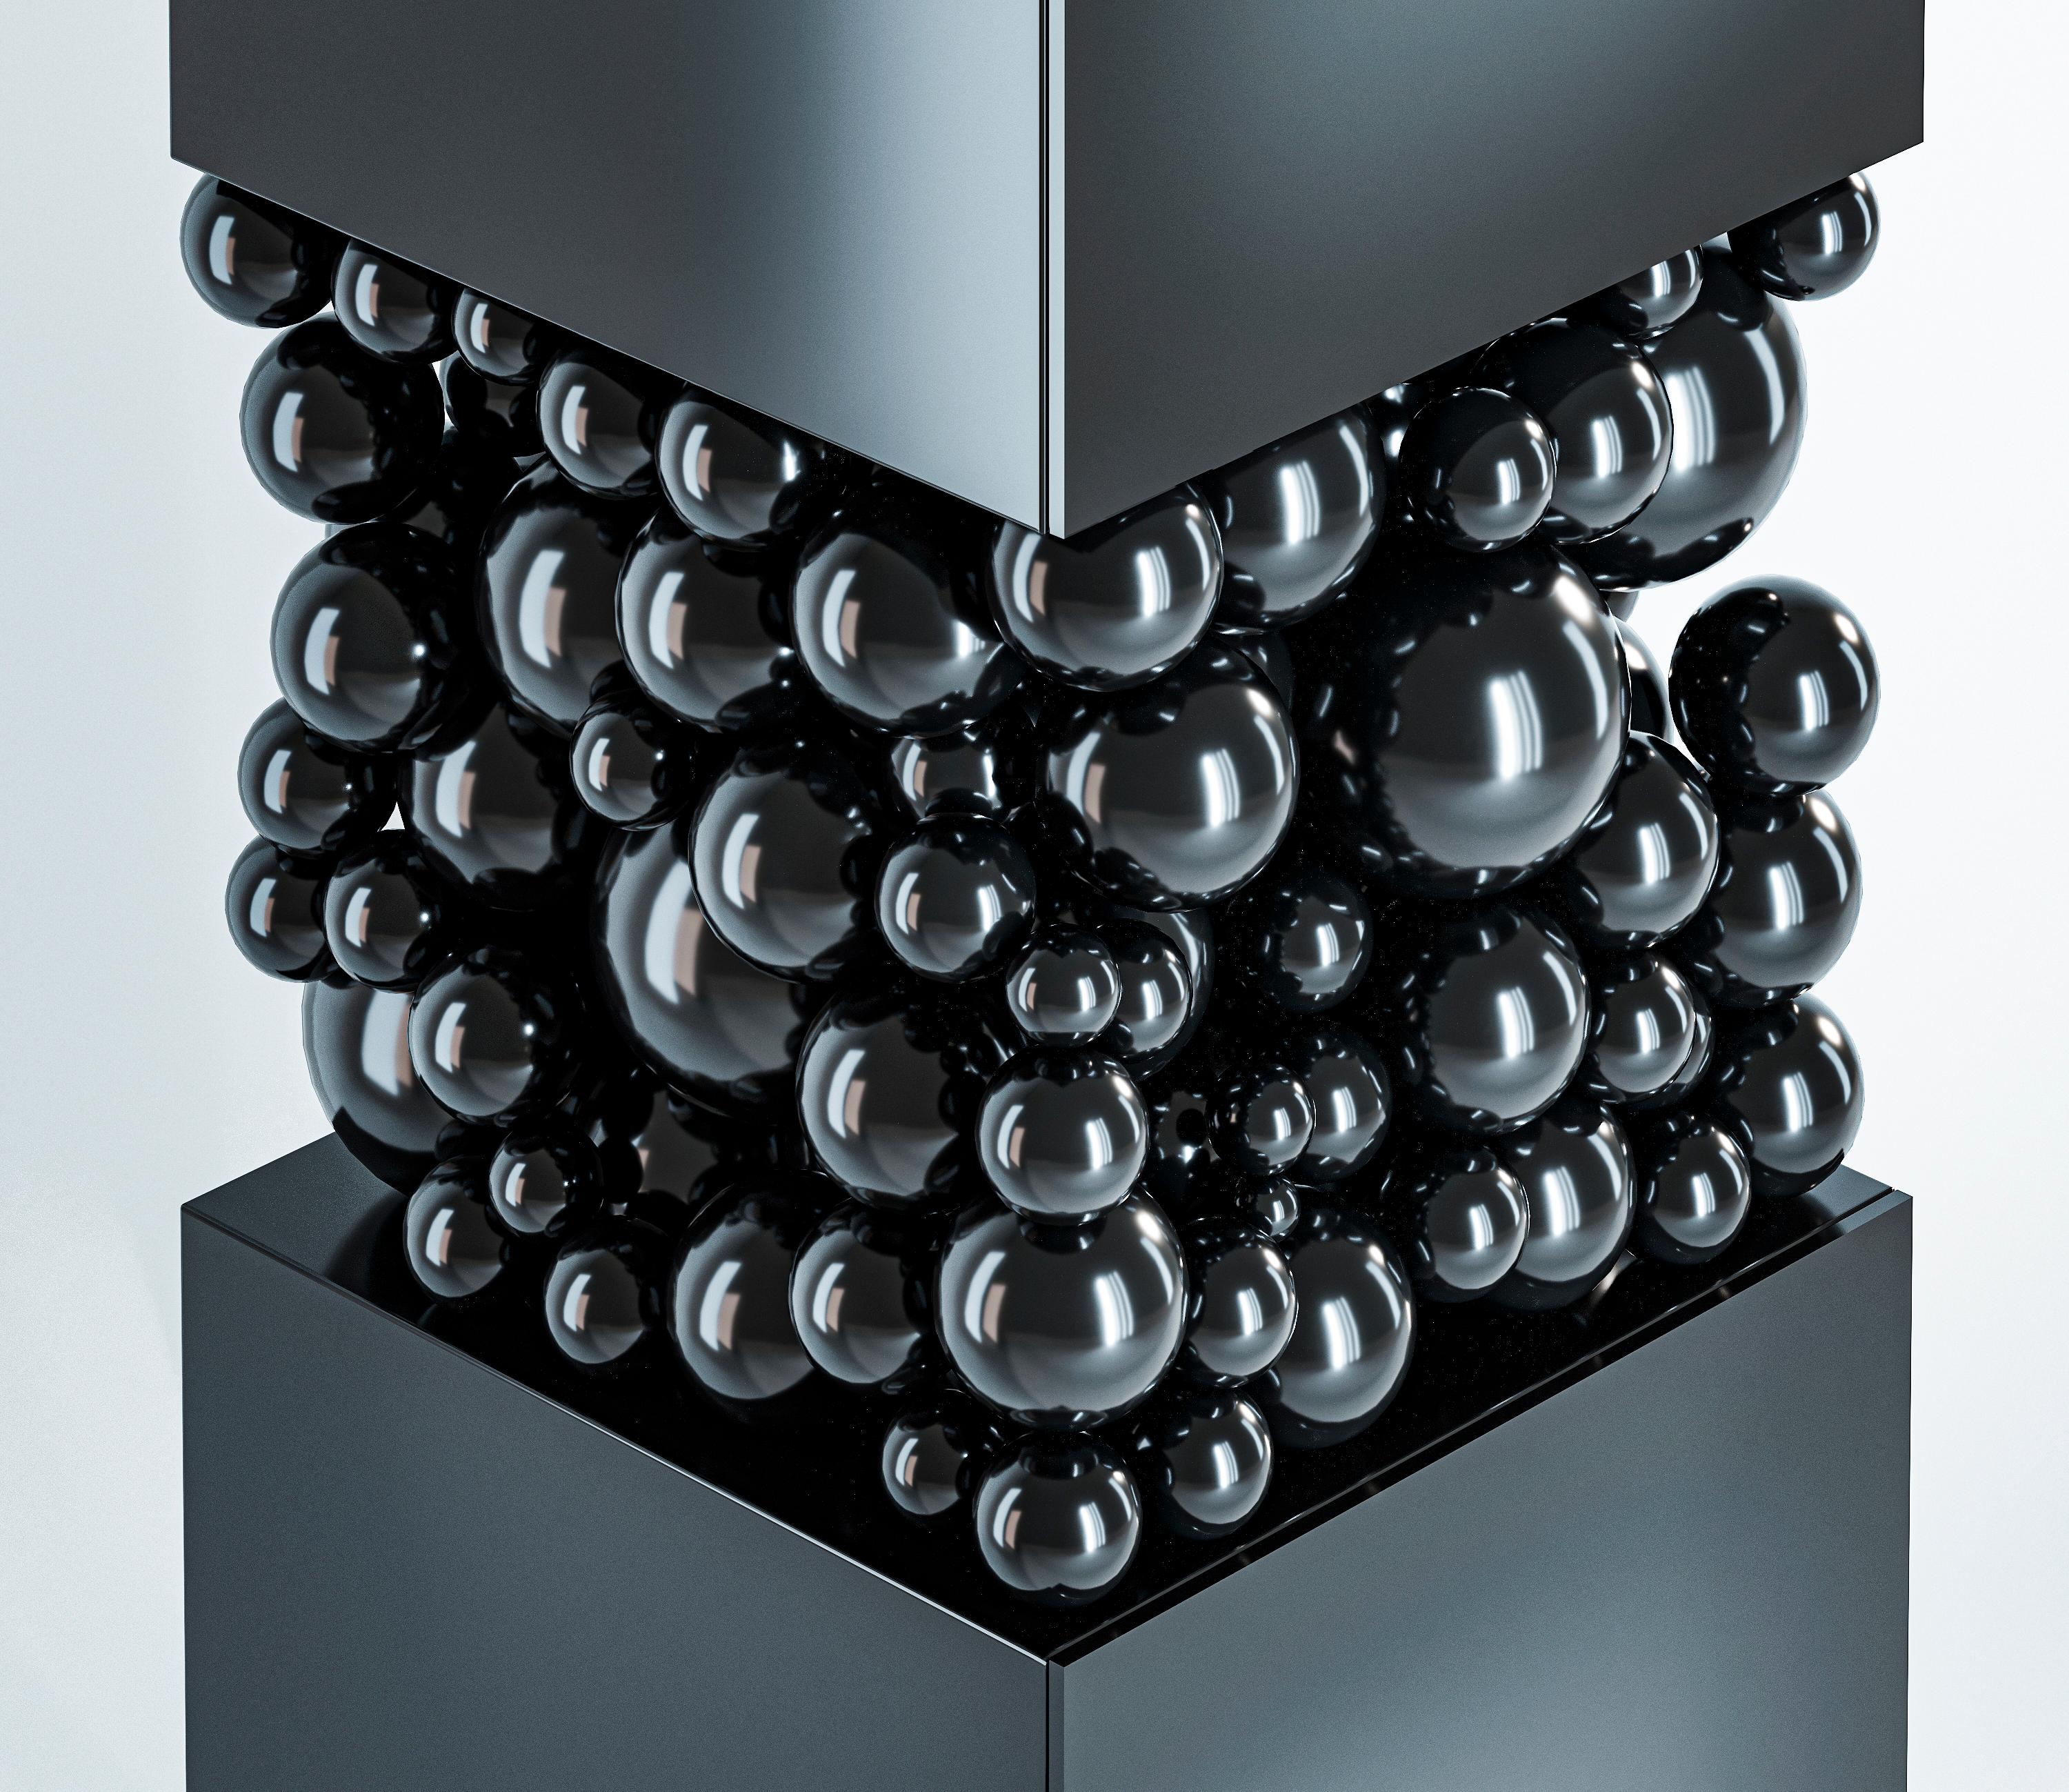 Ukrainian Metal and Plywood Black Cabinet, Bubbles Collection, Amazing Emotional Design For Sale